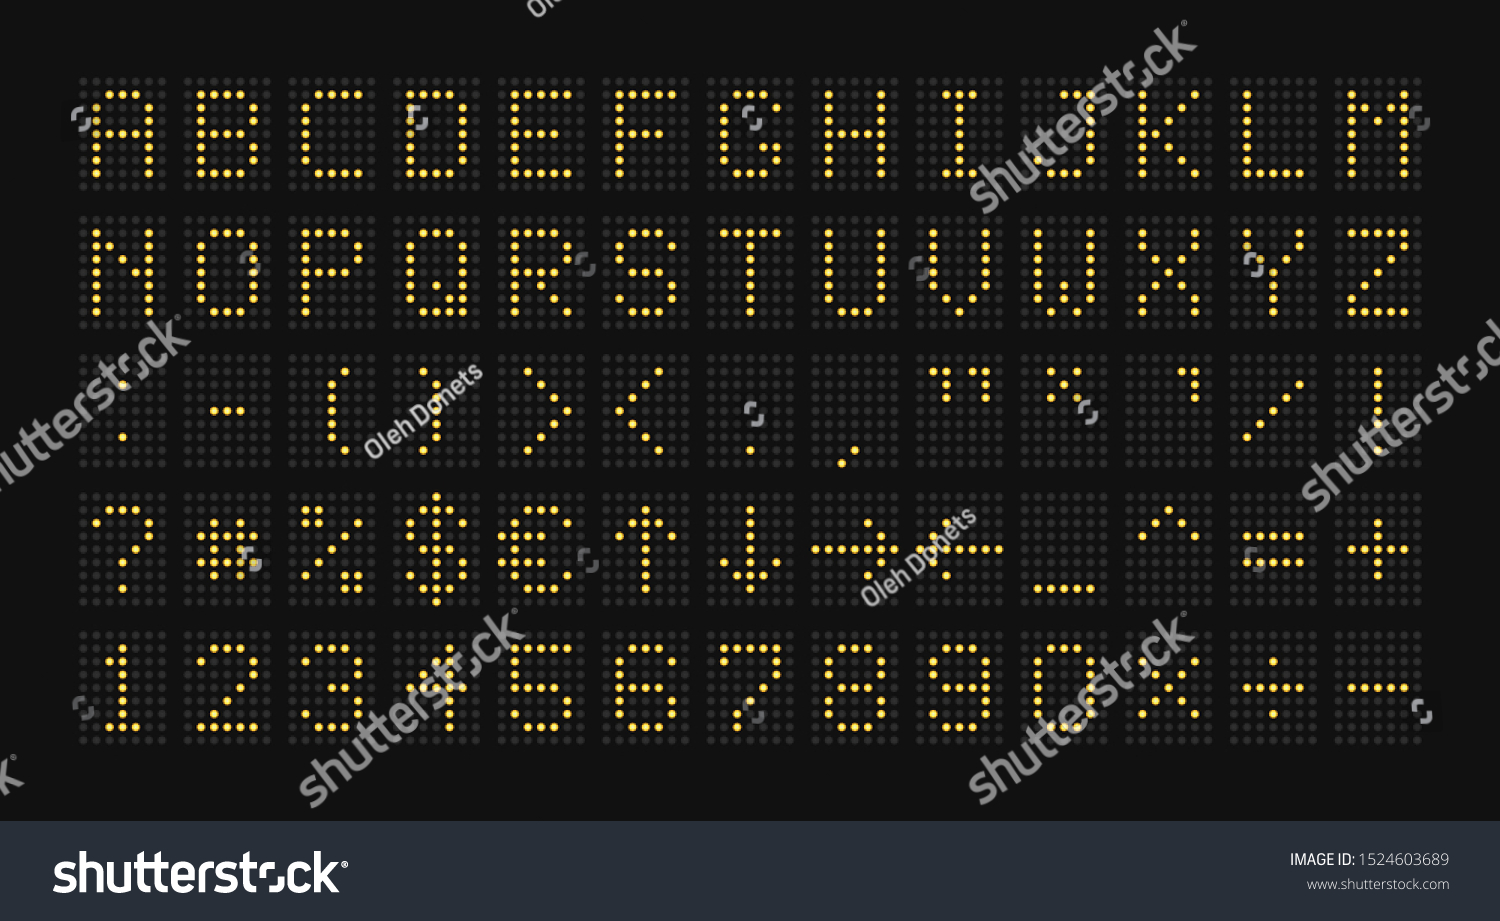 SVG of Electronic scoreboard. Alphabet with special characters. Vector illustration. svg